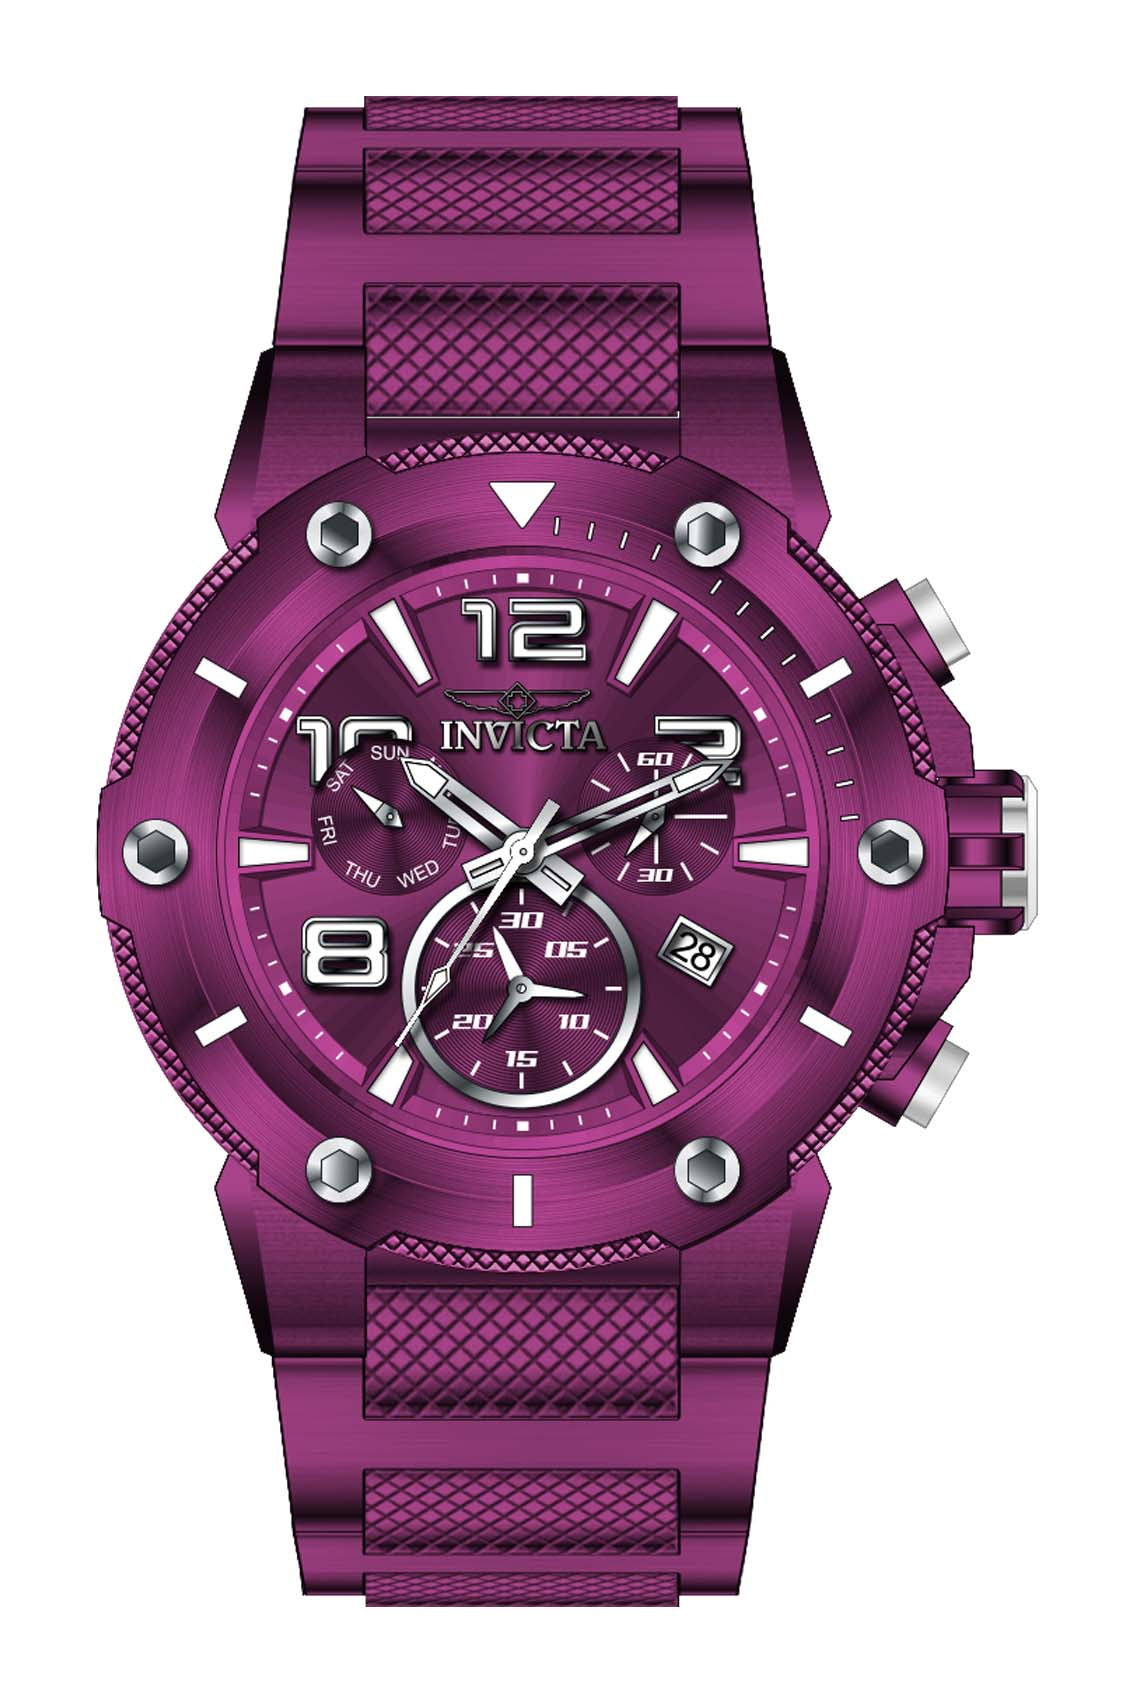 Band for Invicta Speedway Men 40234